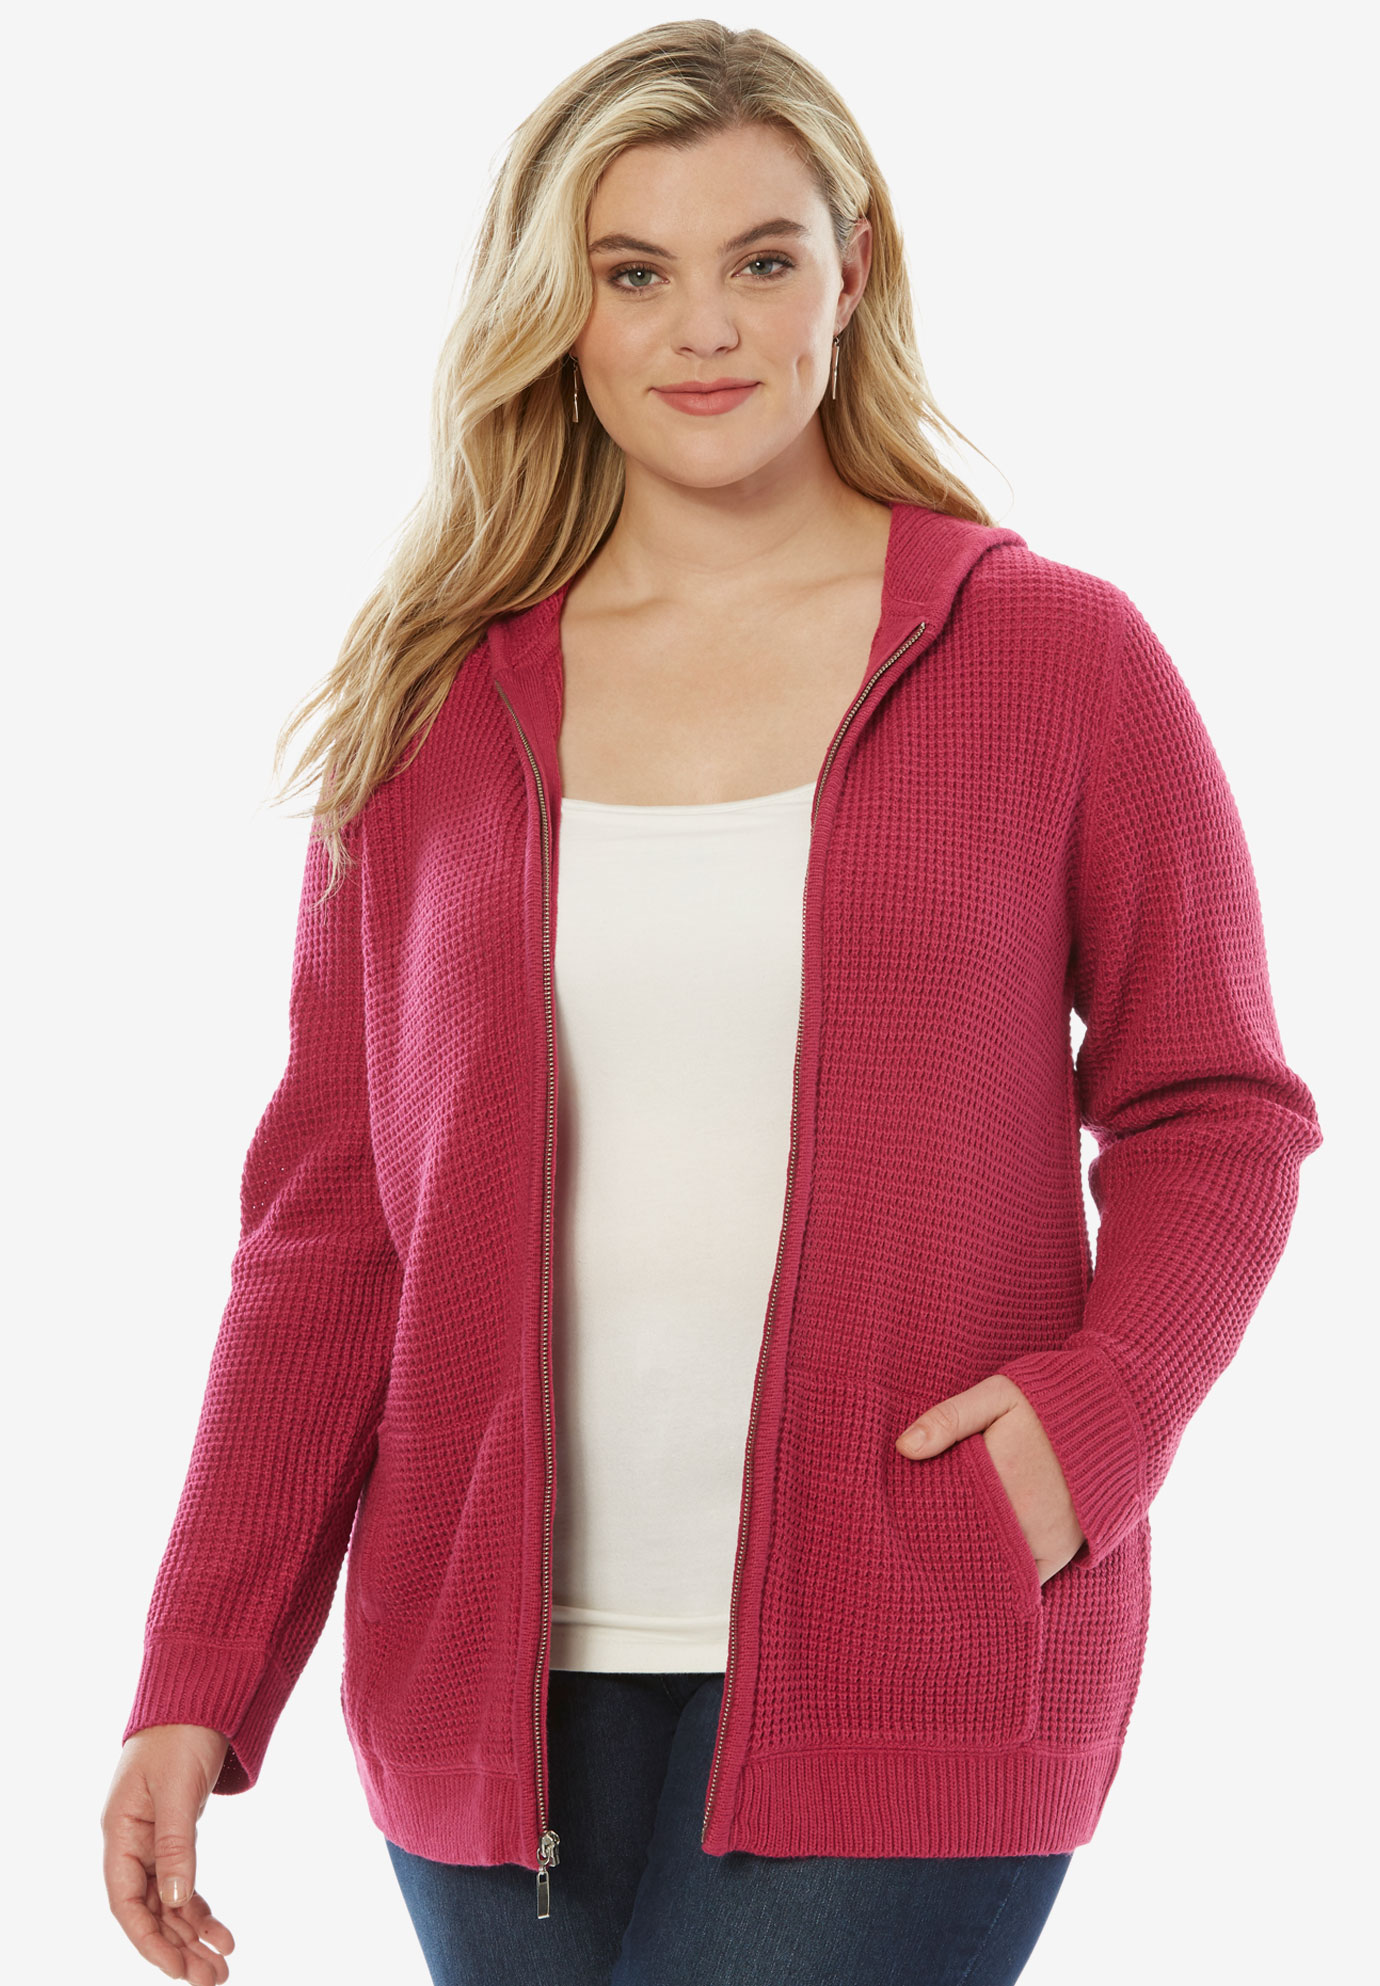 thermal hoodie cardigan for women sizes size